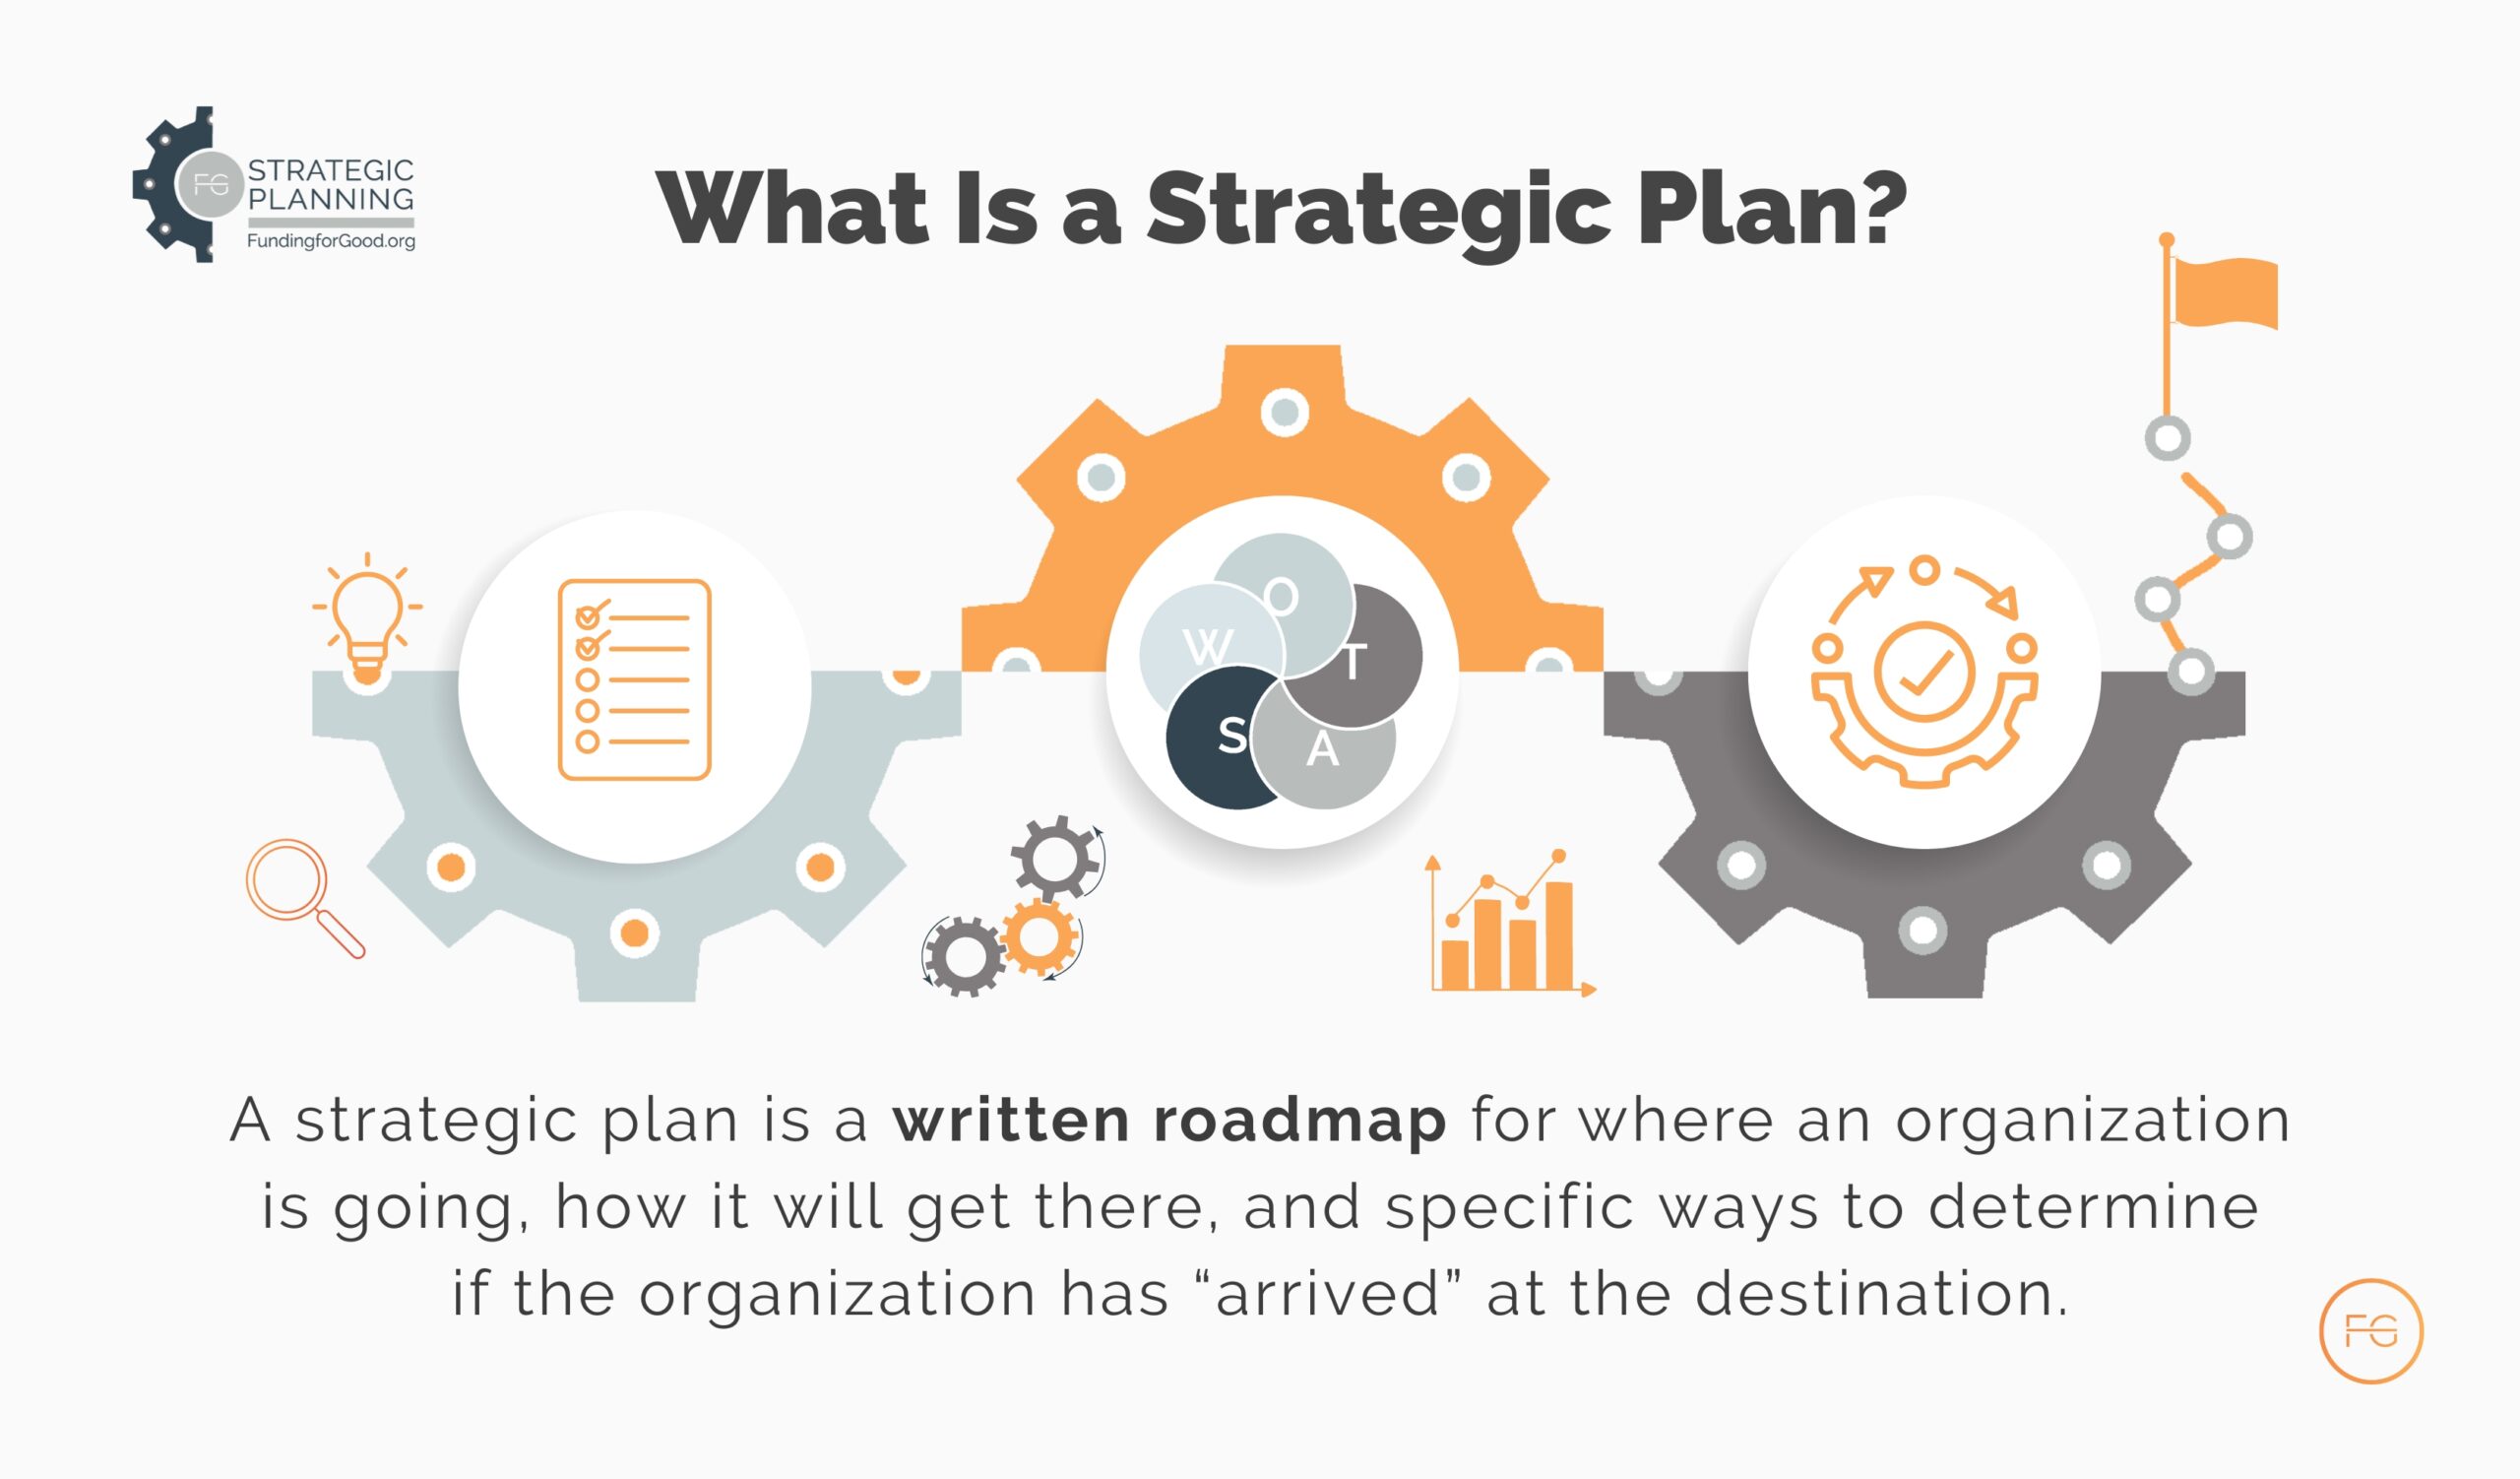 What is a strategic plan? A strategic plan is a written roadmap for where an organization is going, how it will get there, and specific ways to determine if an organization has "arrived" at the destination.